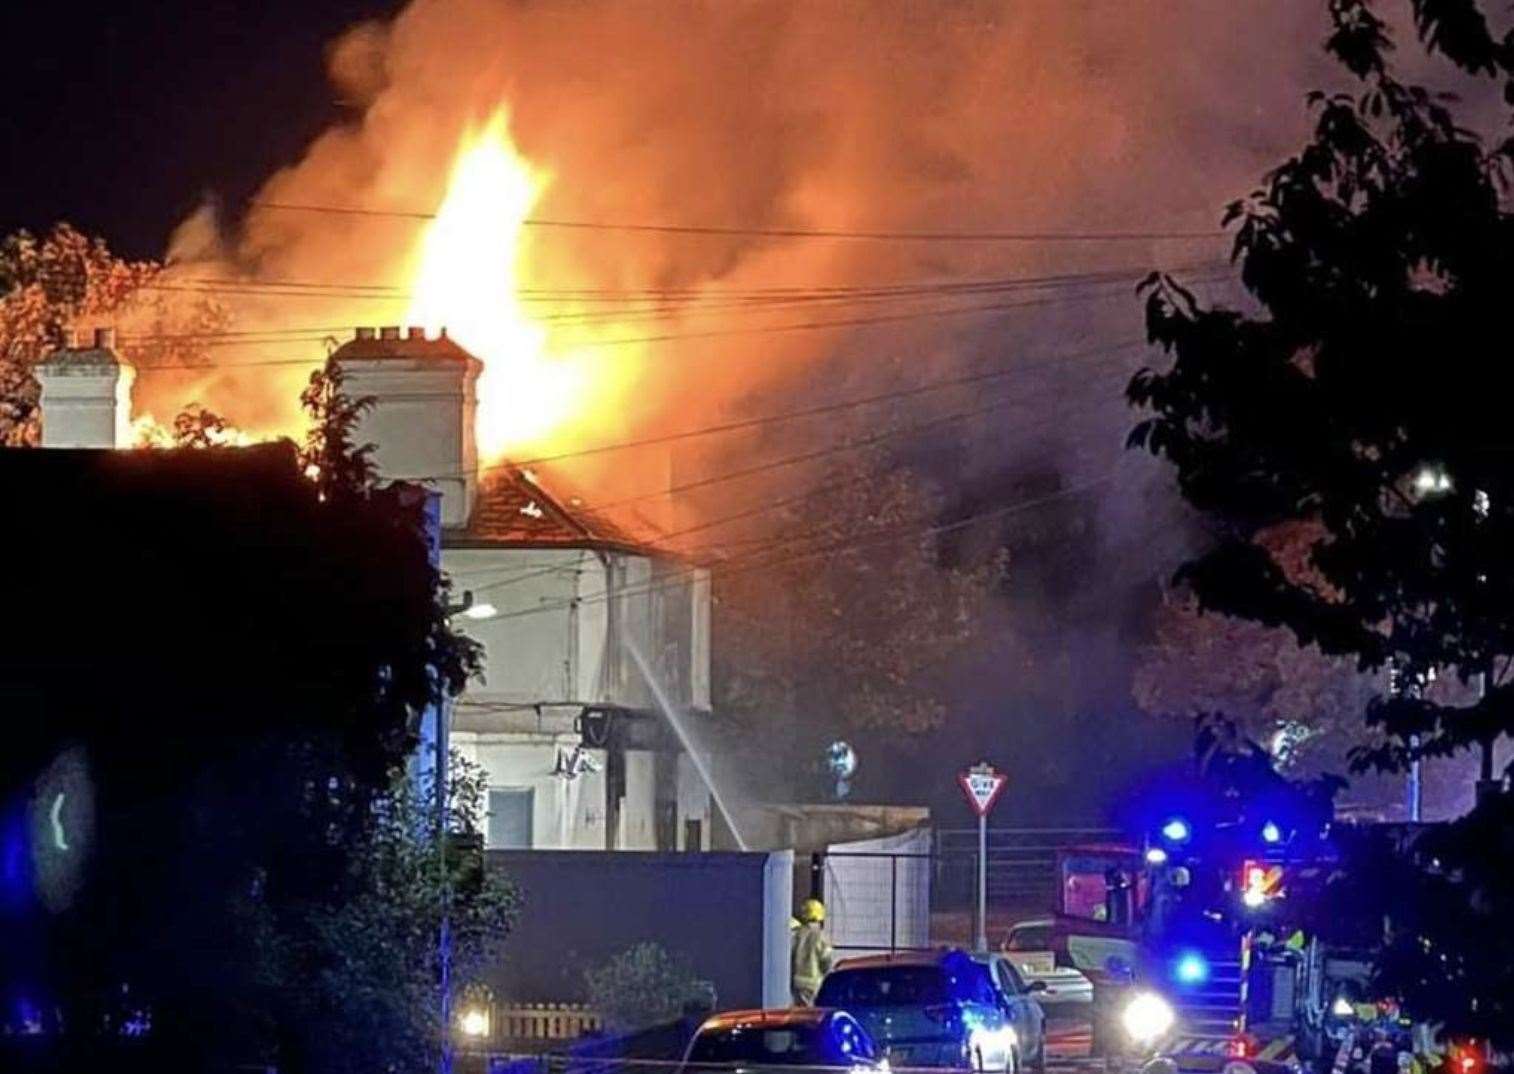 It took six fire engines several hours to put out the blaze at Chilton Tavern in Ramsgate. Photo: Ruby Astrid